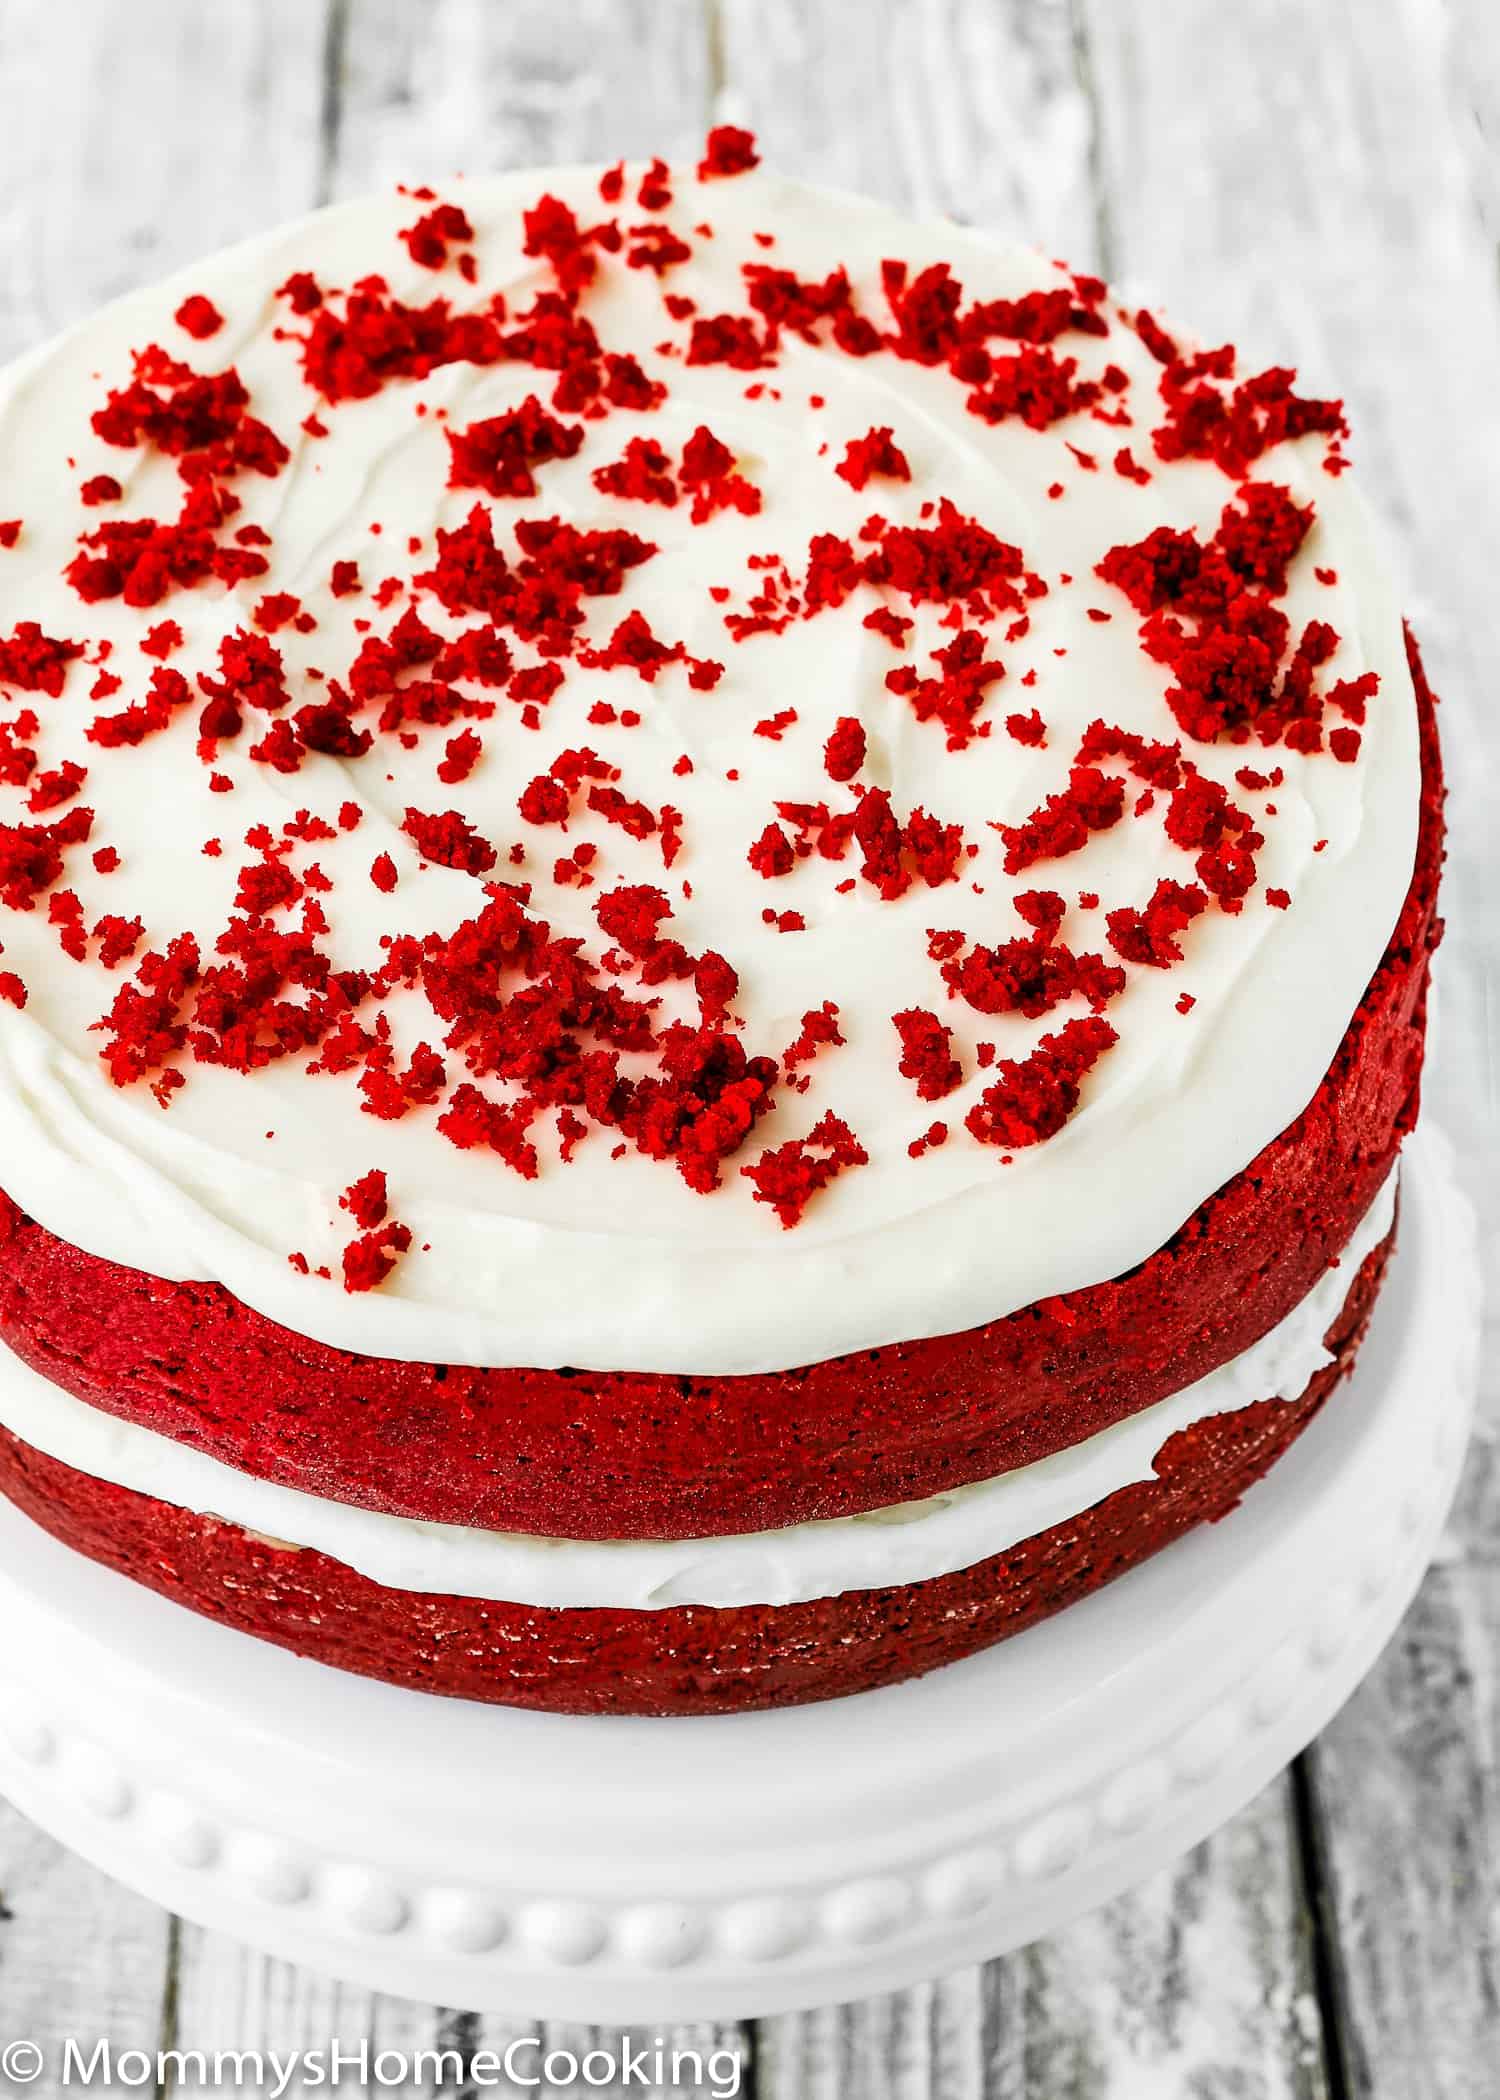 Angled photo of a two tiered red velvet cake with cream cheese frosting, made without eggs.